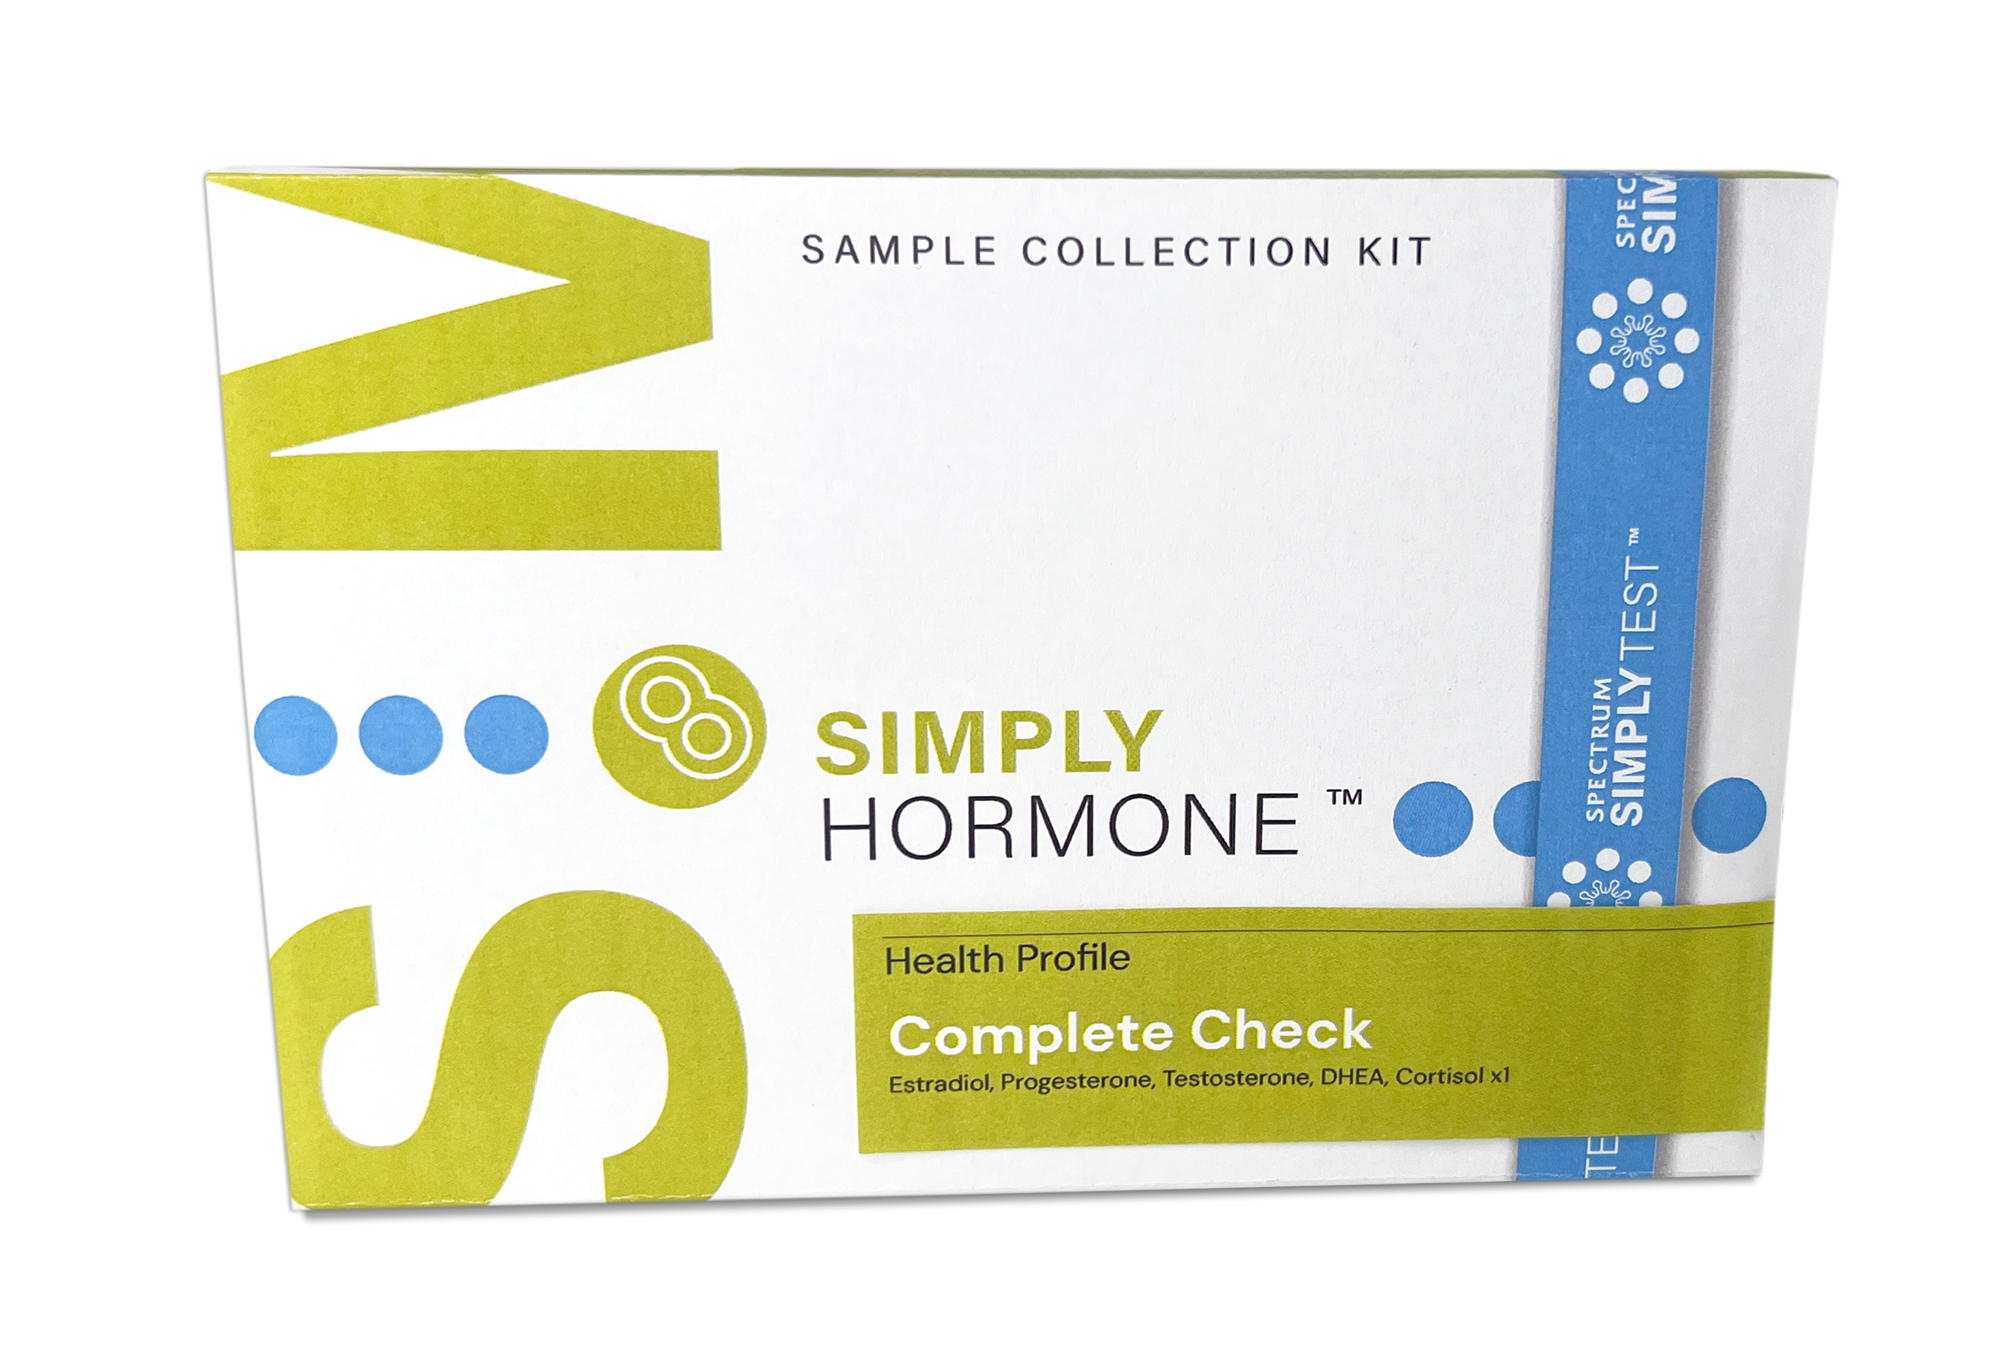 Simply Hormone Complet Check Test Kit